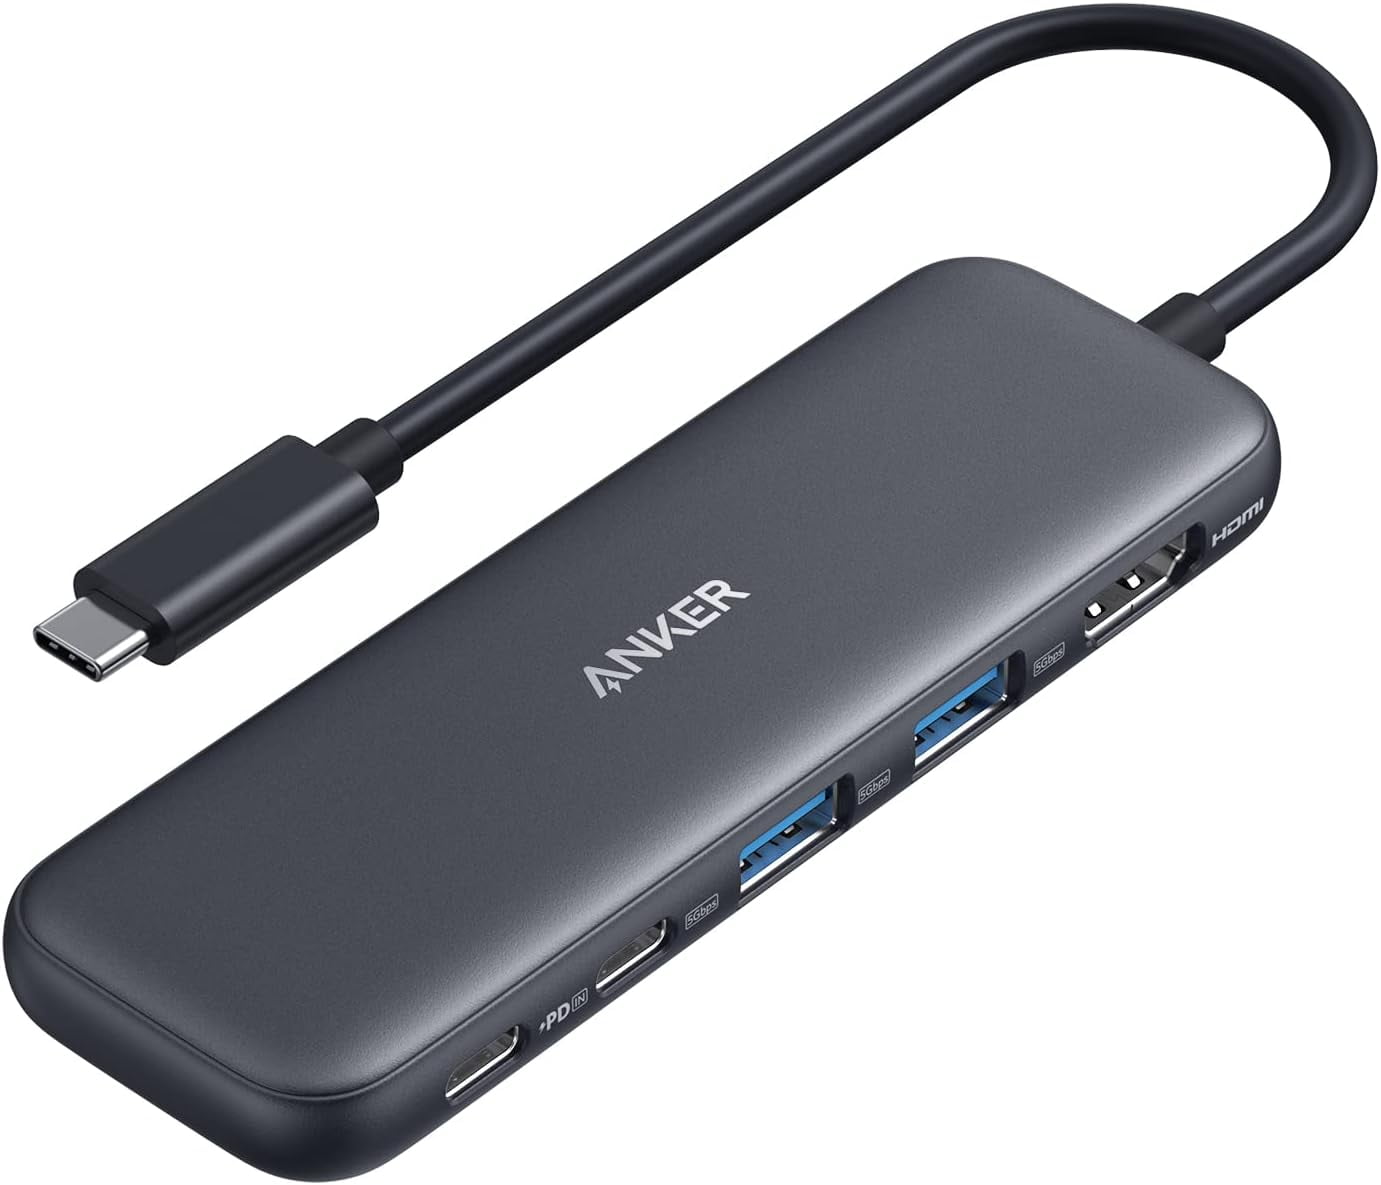 Anker 332 USB-C Hub (5 in 1) with 4K HDMI Display, 5Gbps USB-C Data Port  and 2 x 5Gbps USB-A Data Ports with MacBook Pro, MacBook Air, Dell XPS,  Lenovo Thinkpad, HP